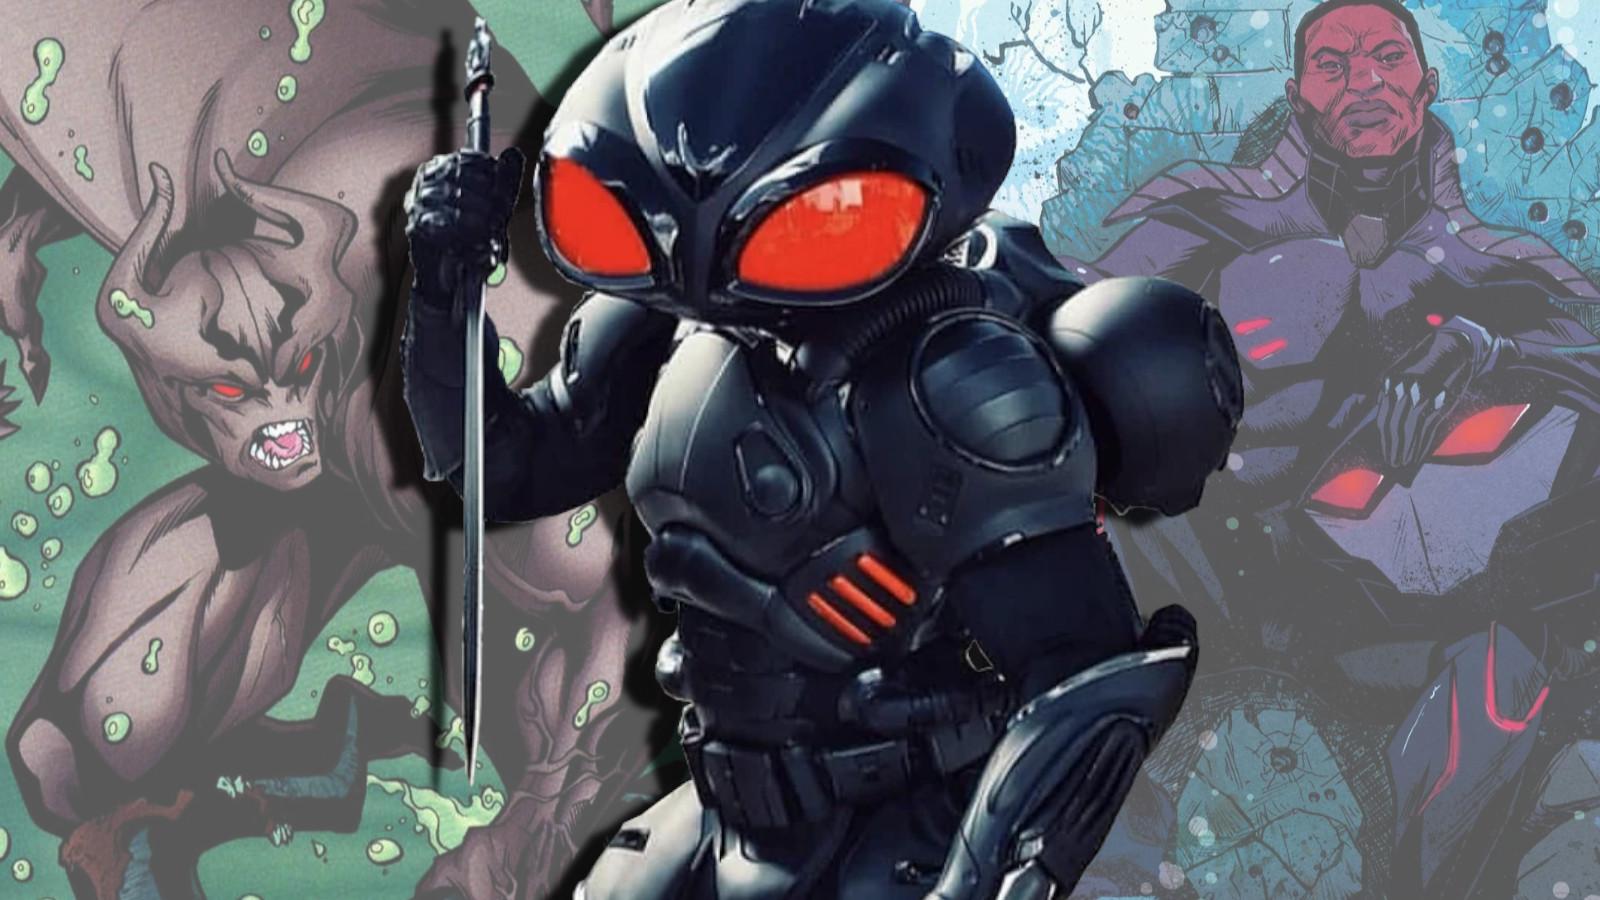 Black Manta in DC Comics and the DC Extended Universe.